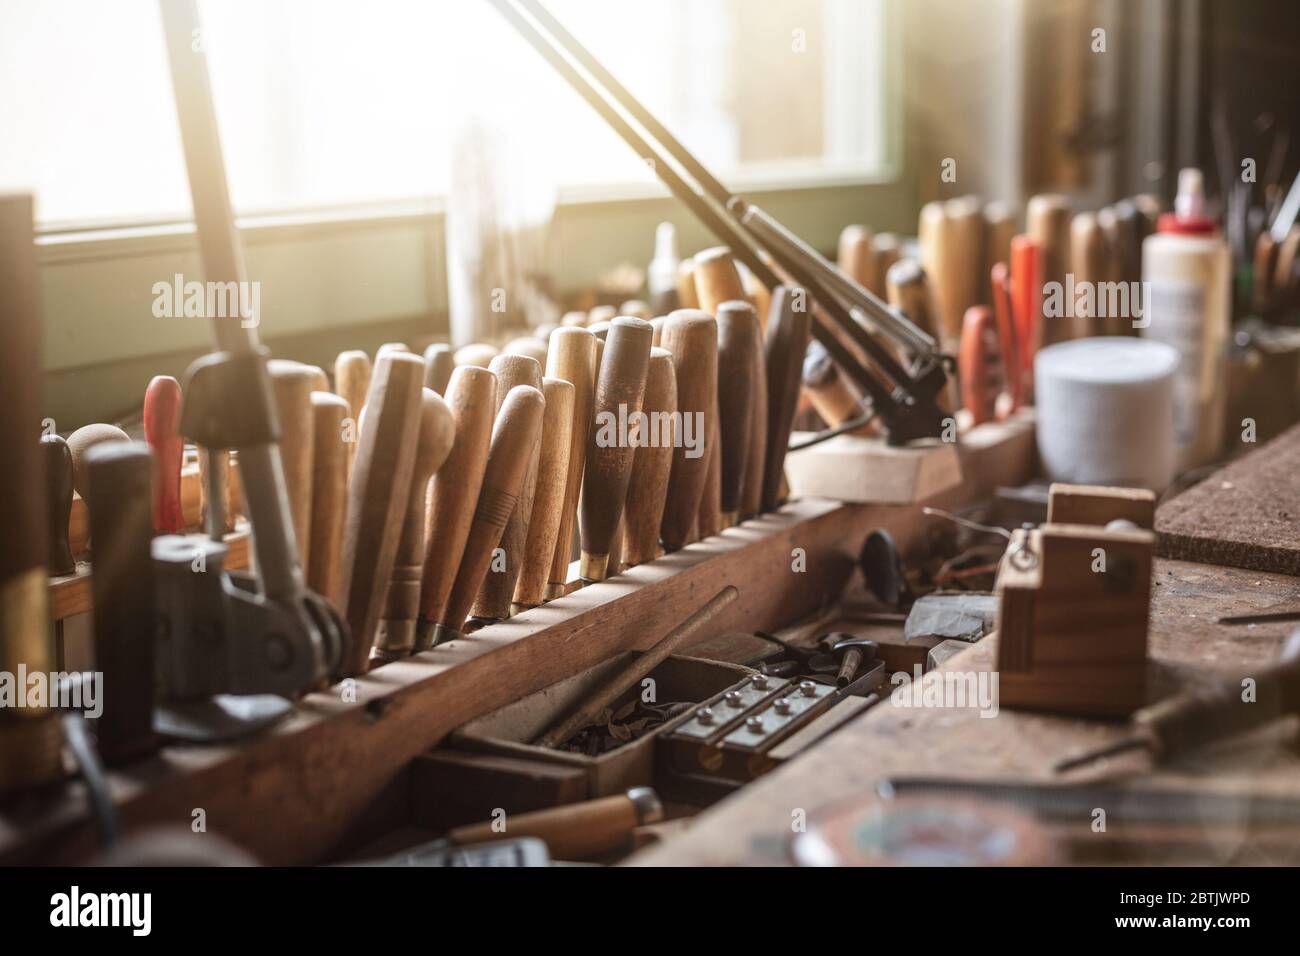 Rustic joinery workbench with many tools Stock Photo